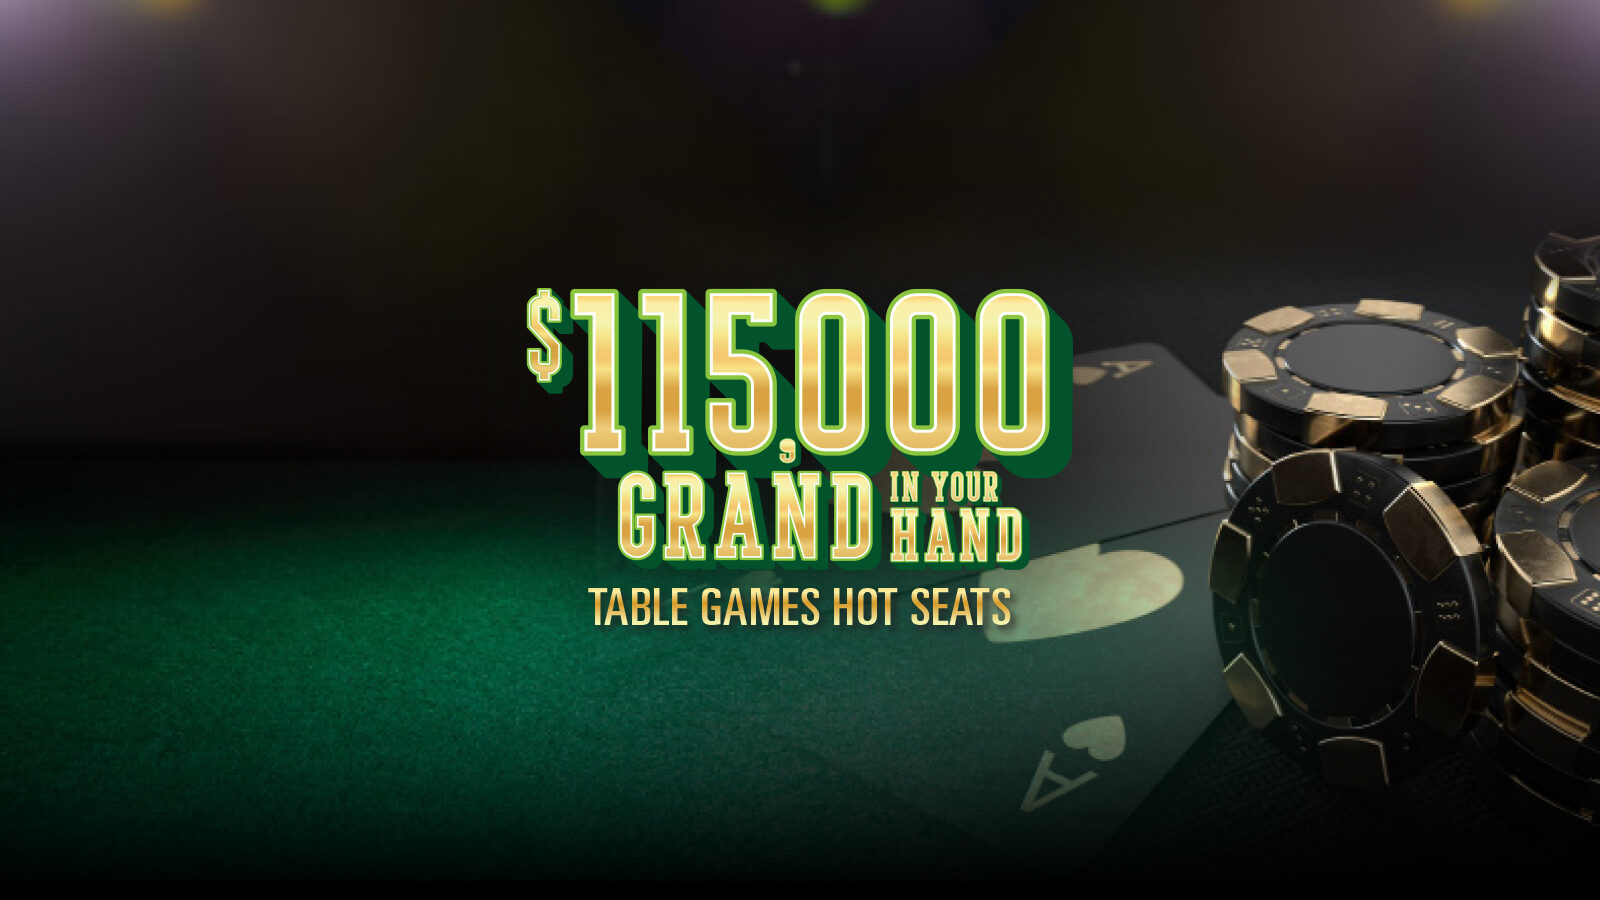 Grand in Your Hand Table Games Hot Seats